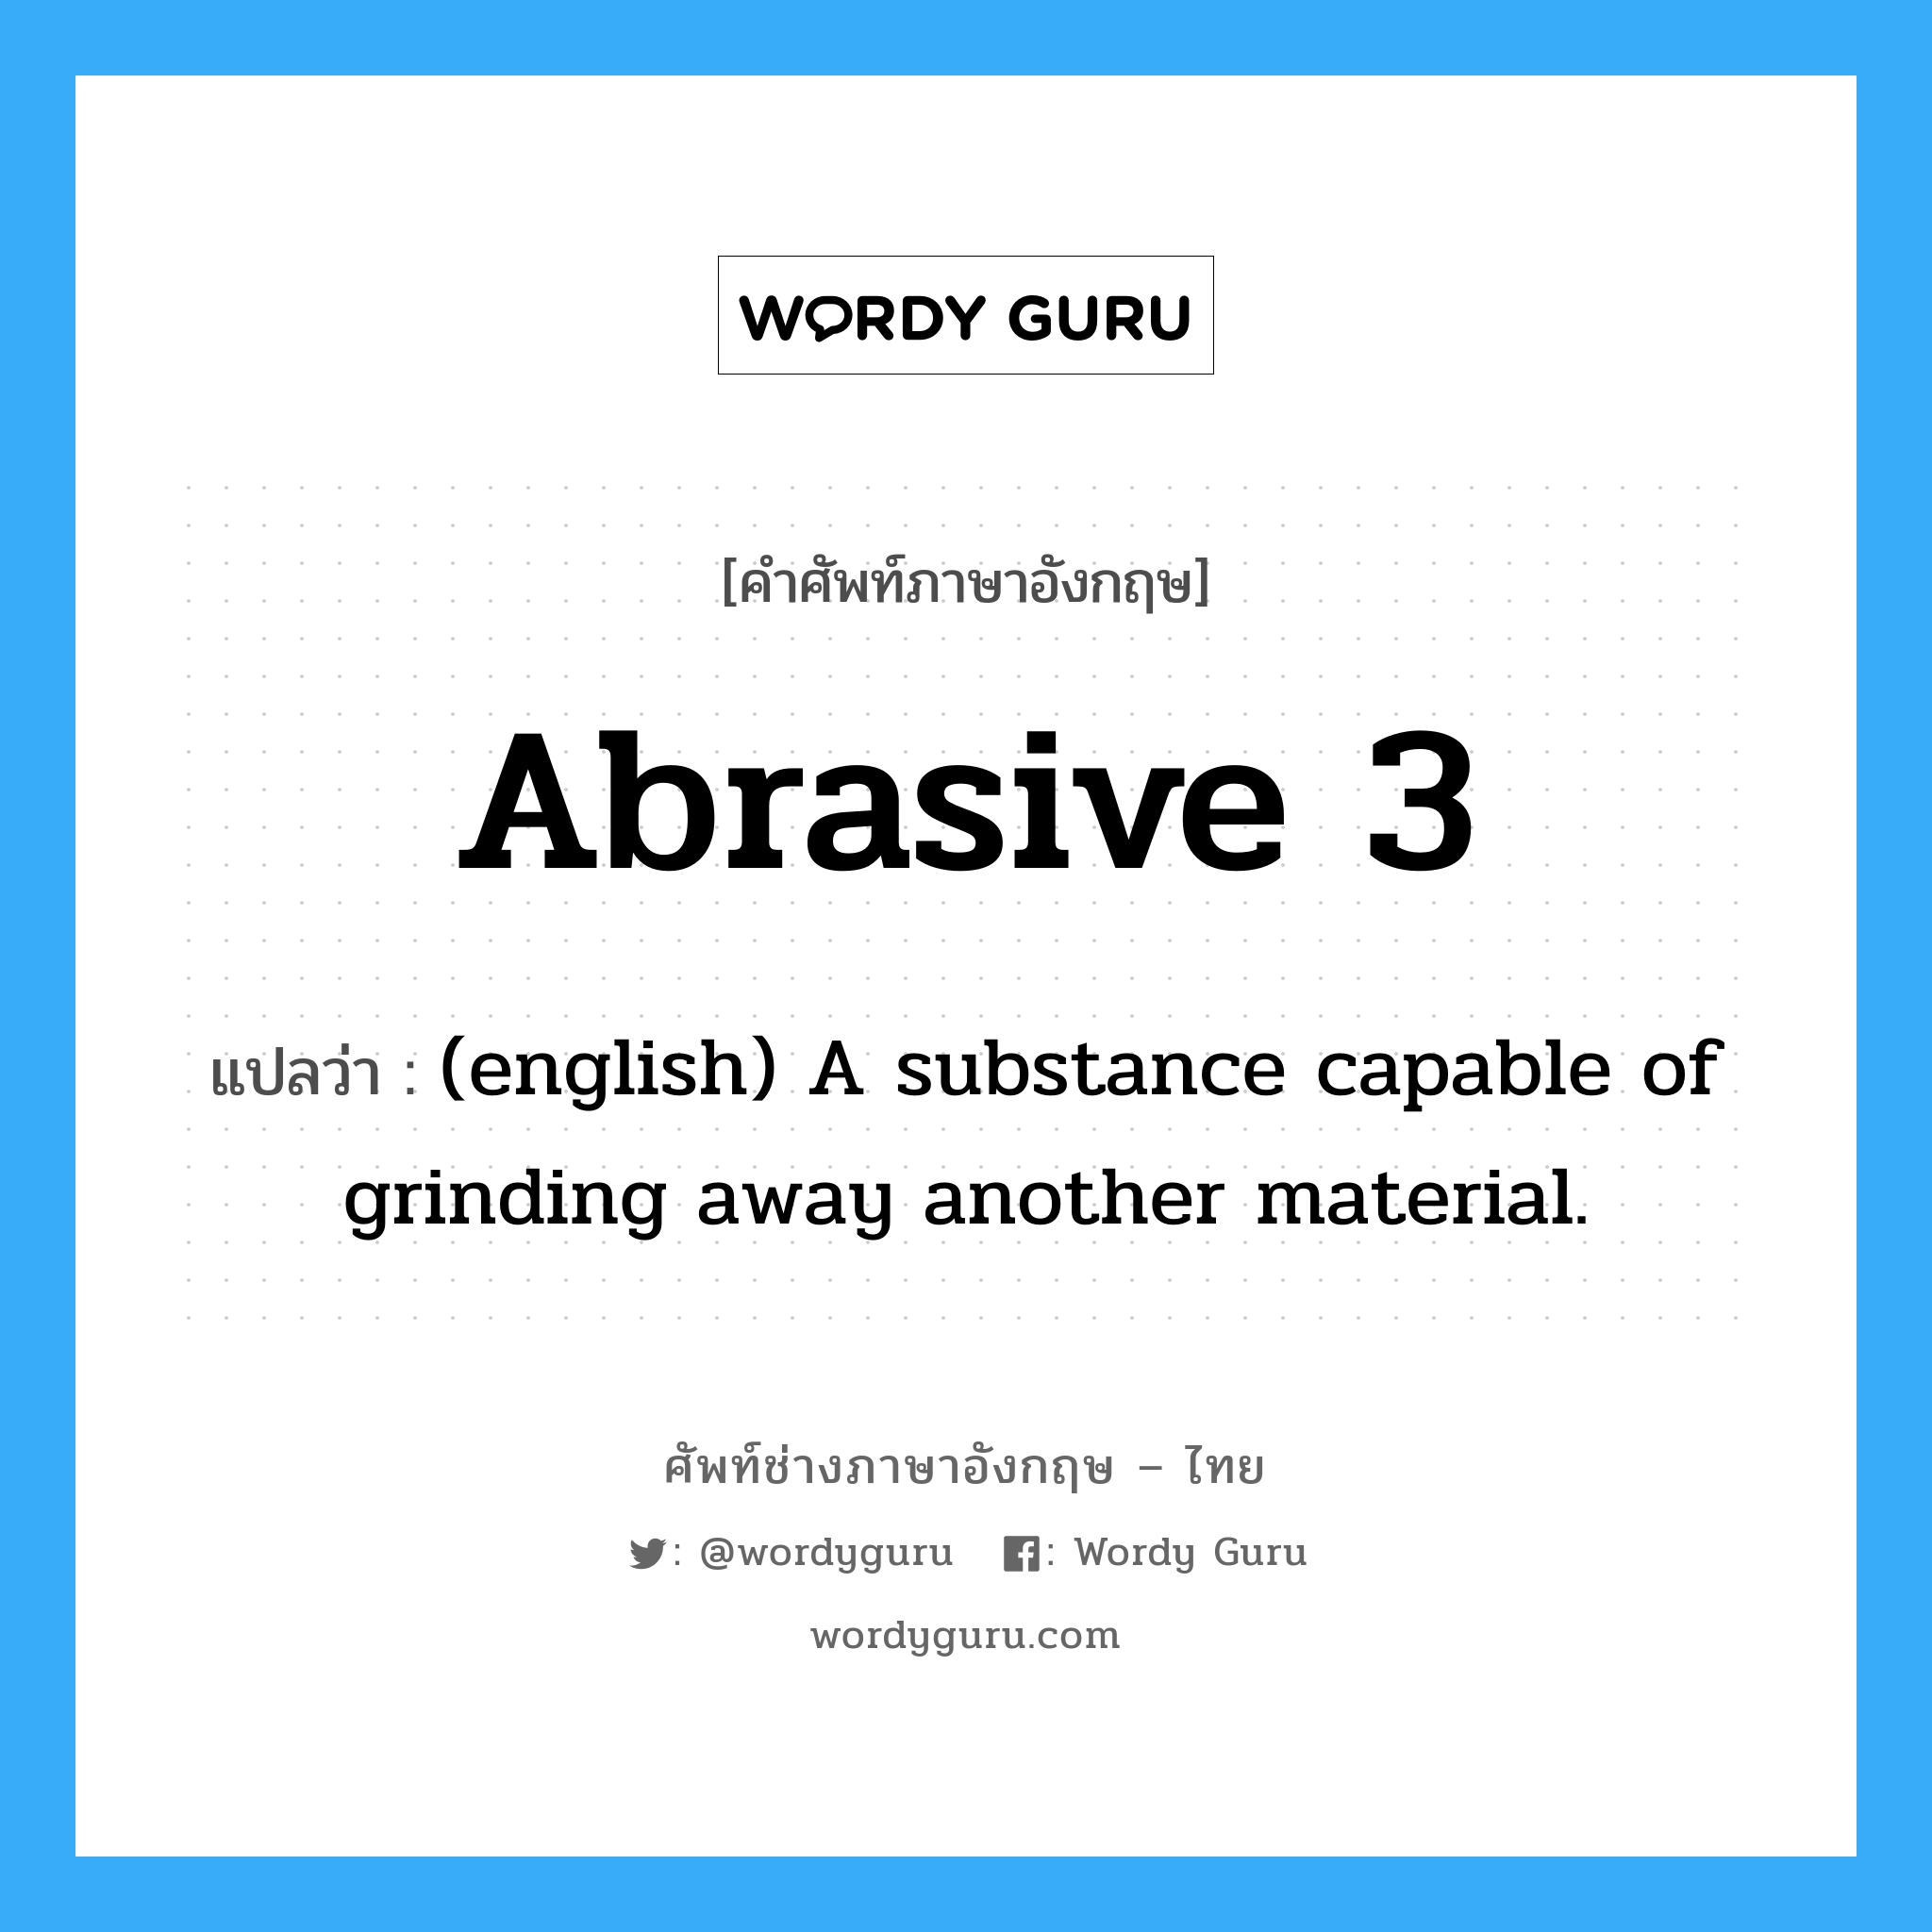 Abrasive 3 แปลว่า?, คำศัพท์ช่างภาษาอังกฤษ - ไทย Abrasive 3 คำศัพท์ภาษาอังกฤษ Abrasive 3 แปลว่า (english) A substance capable of grinding away another material.